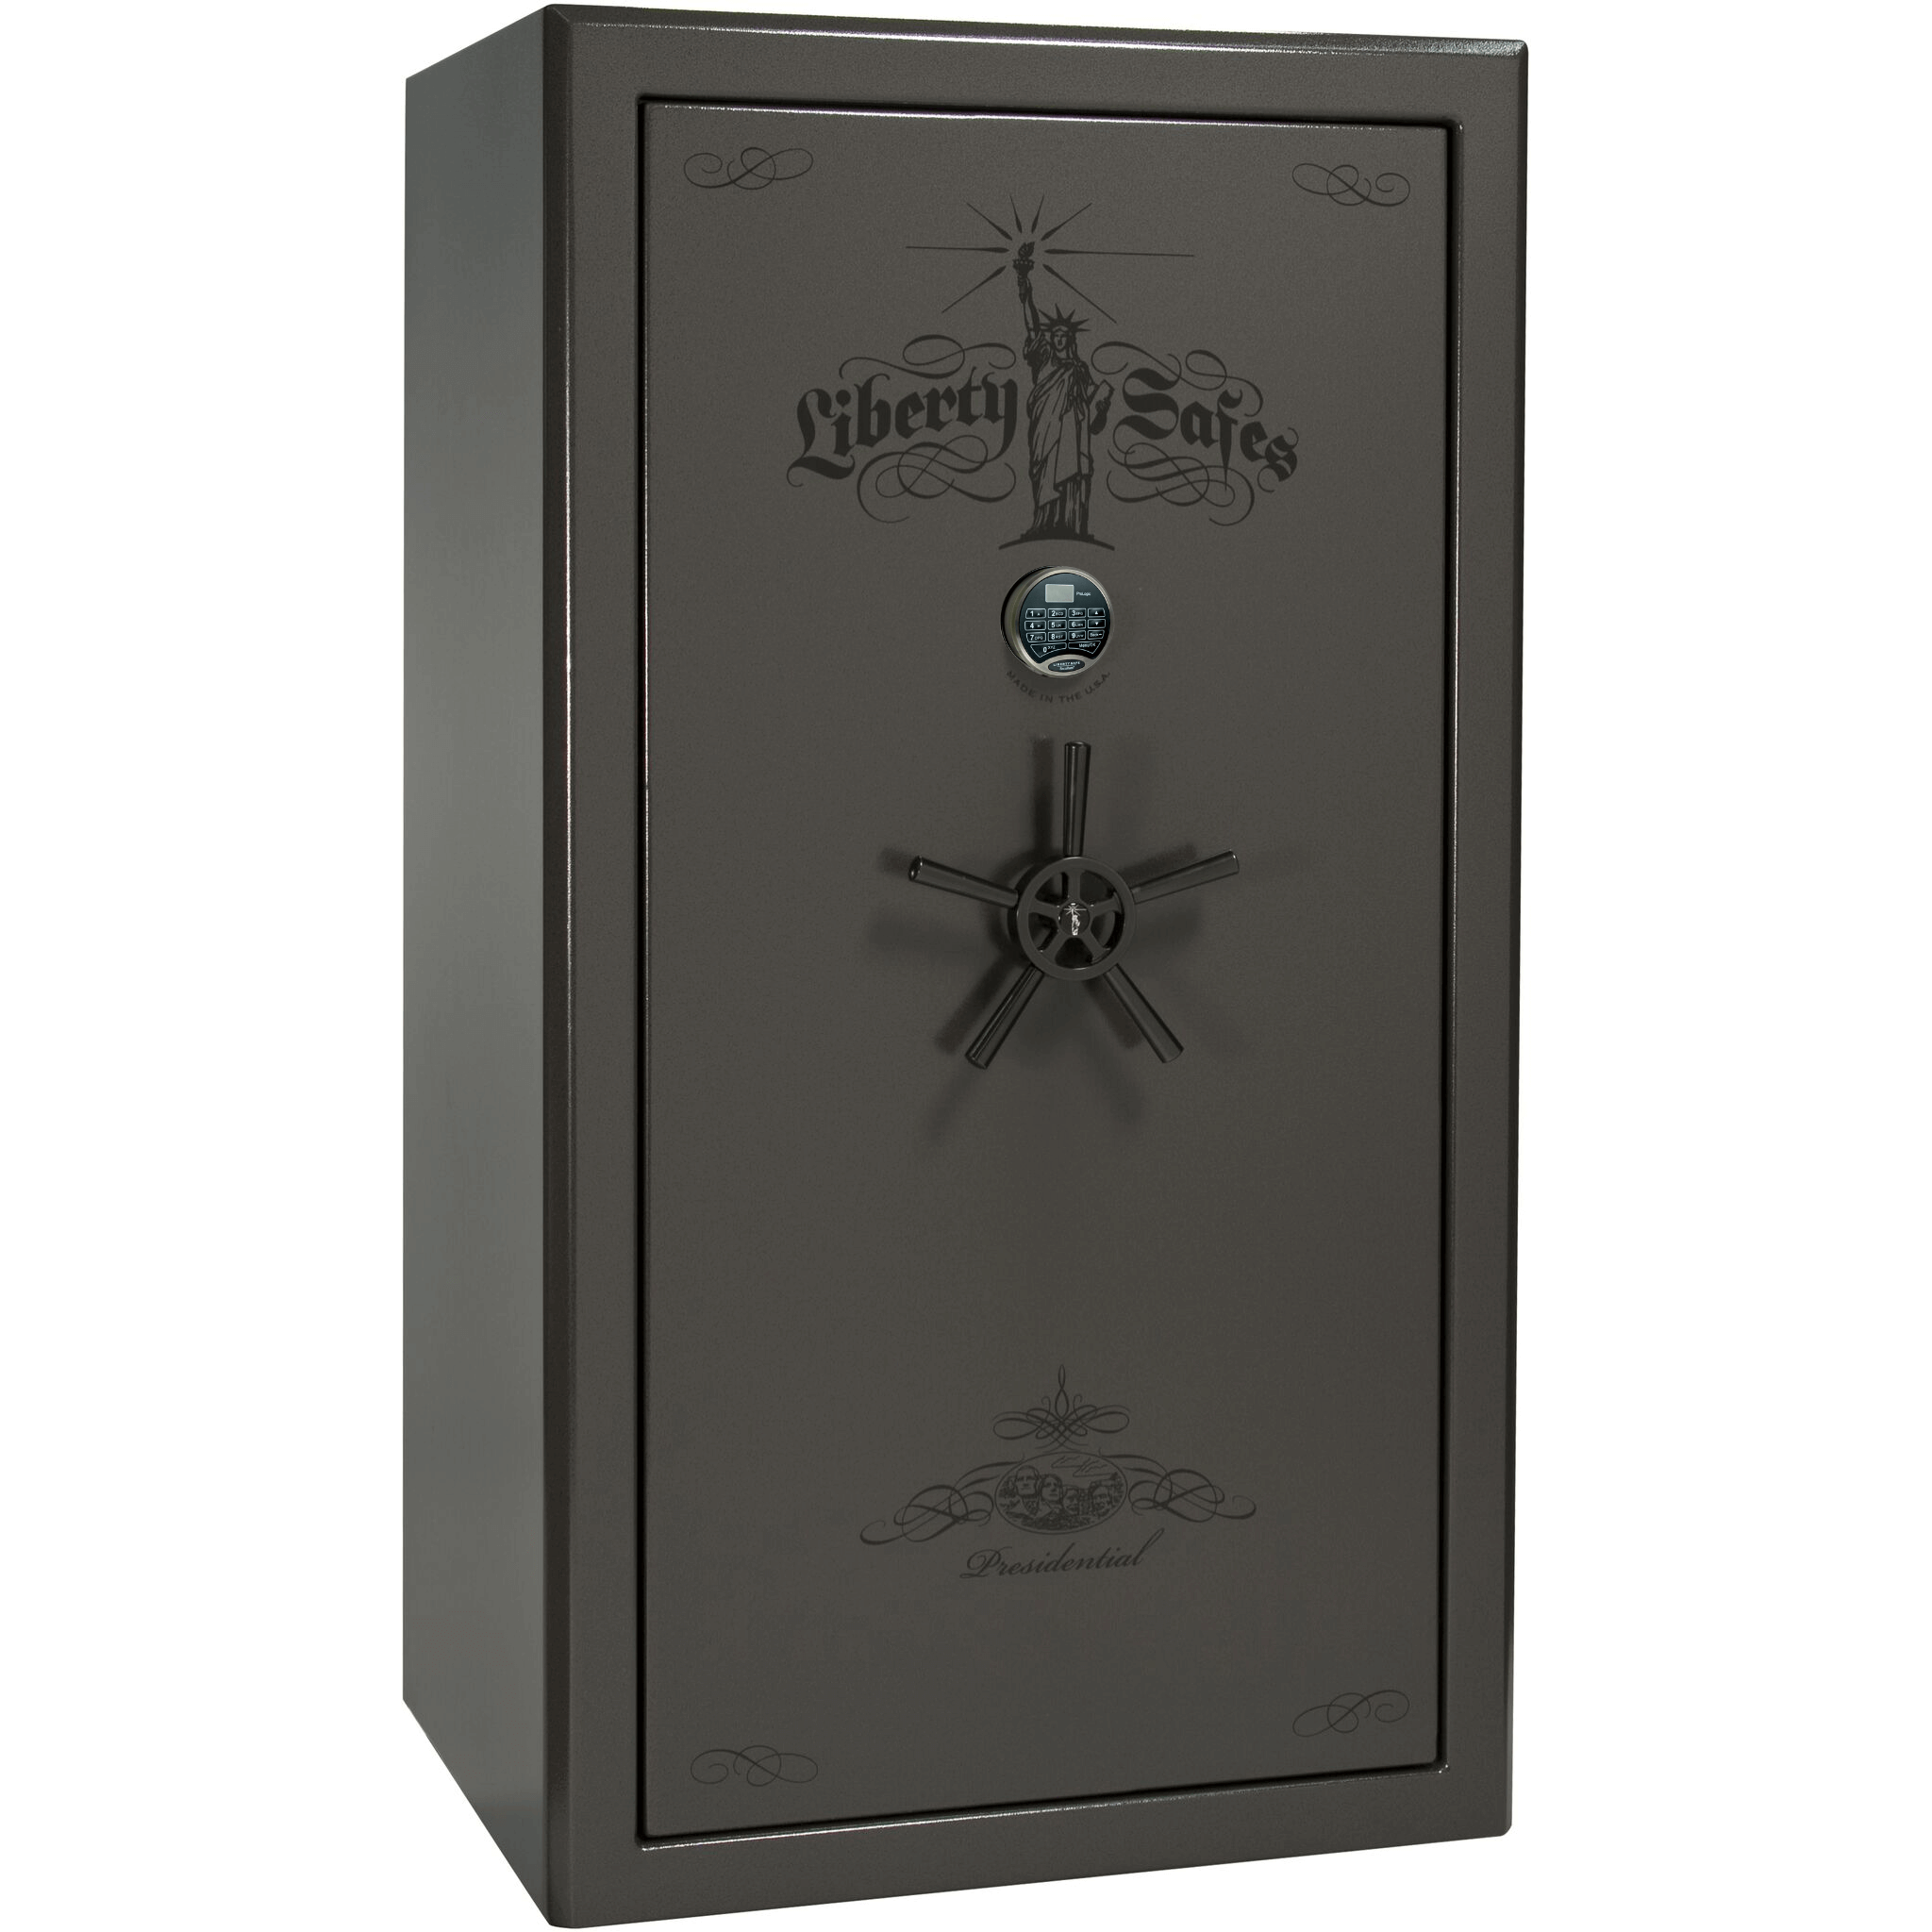 Presidential Series | Level 8 Security | 2.5 Hours Fire Protection | 40 | Dimensions: 66.5"(H) x 36.25"(W) x 32"(D) | Gray Marble | Black Chrome Hardware | Electronic Lock